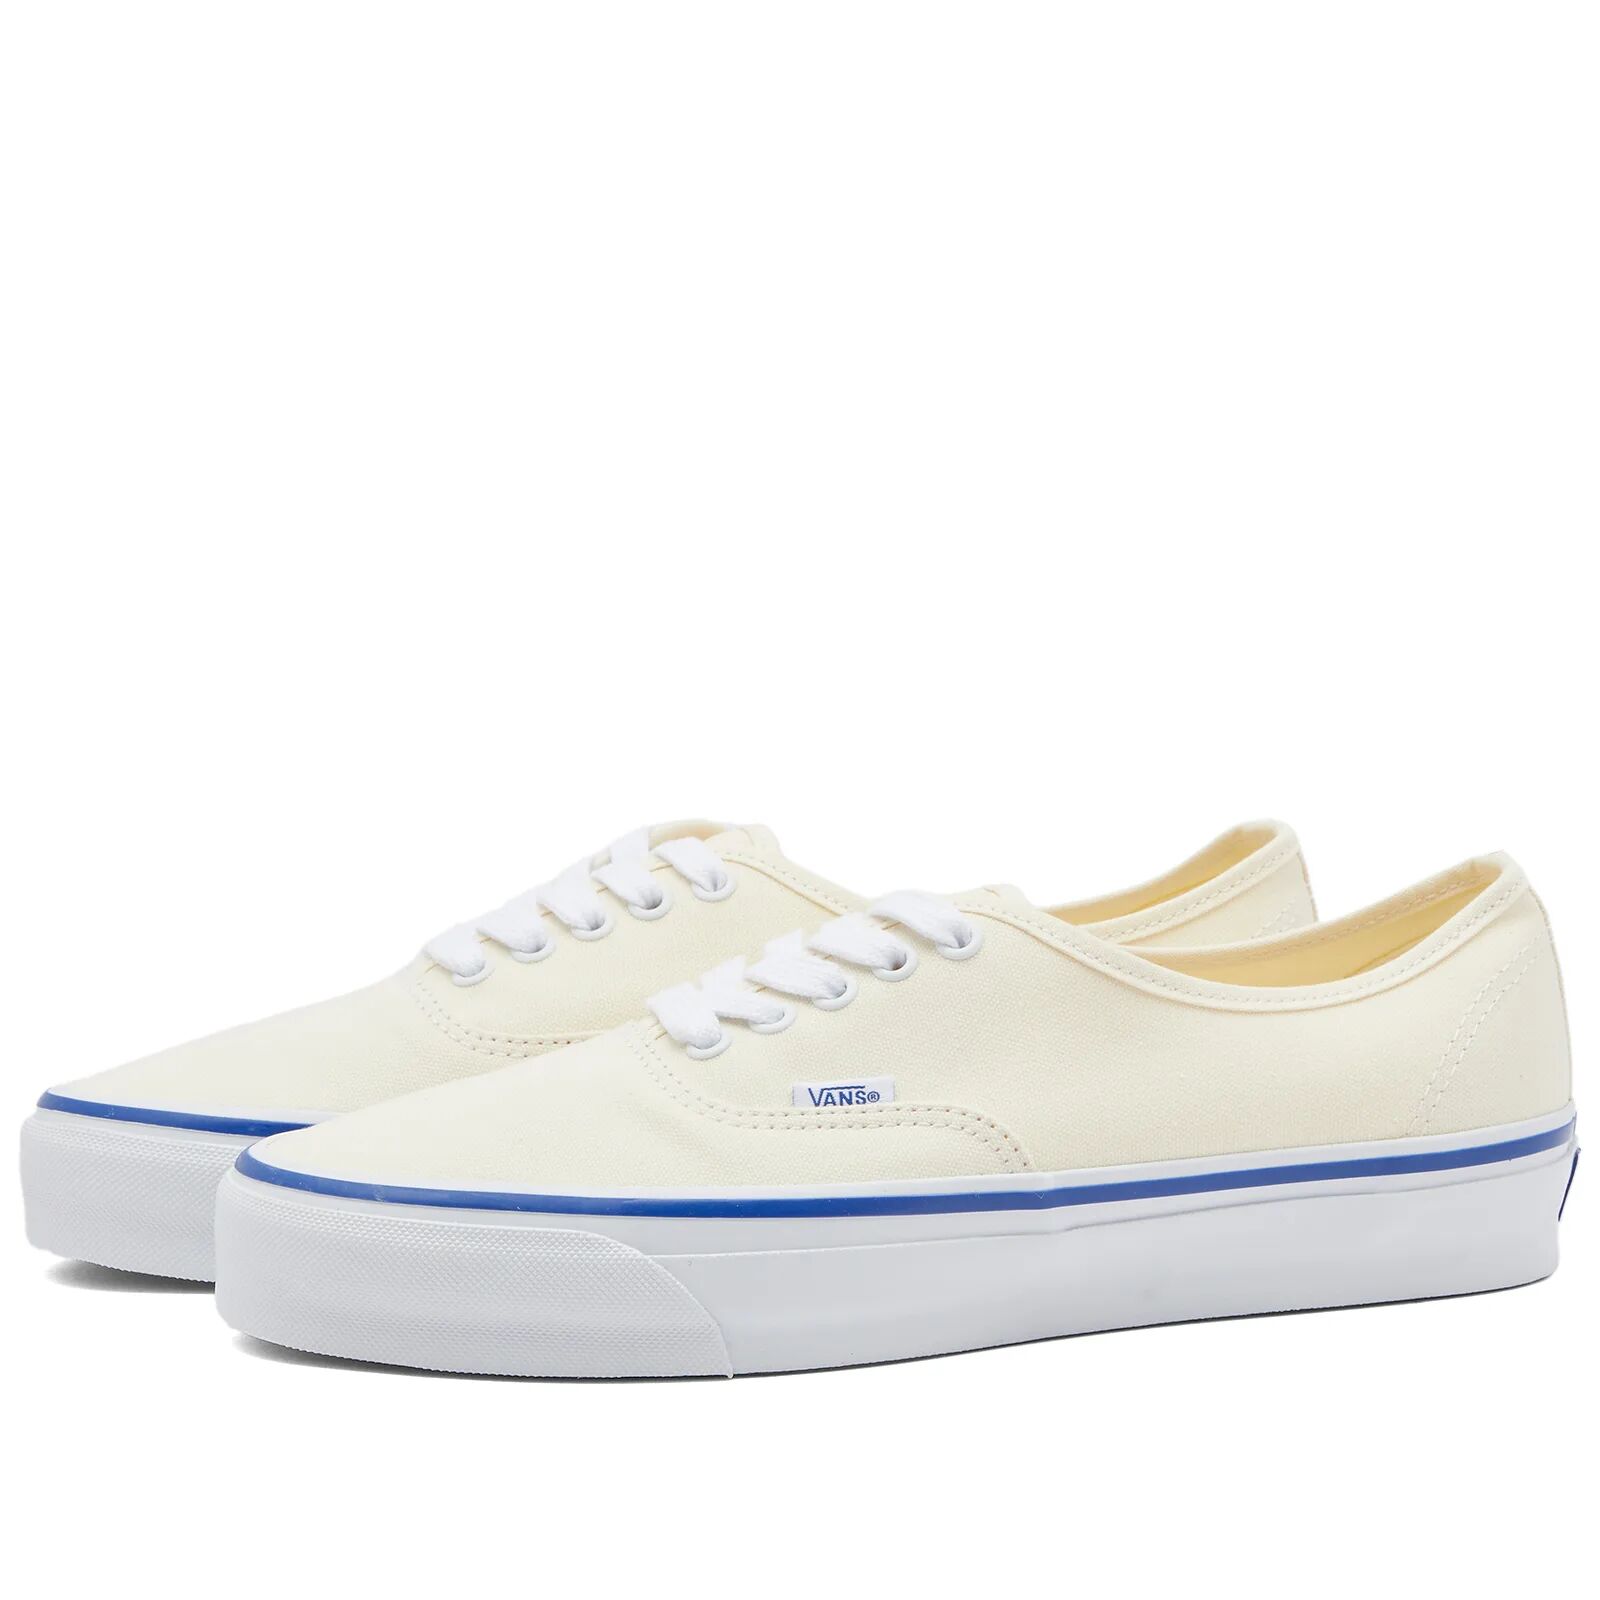 Vans Men's Authentic Reissue 44 Sneakers in Lx Off White, Size UK 9